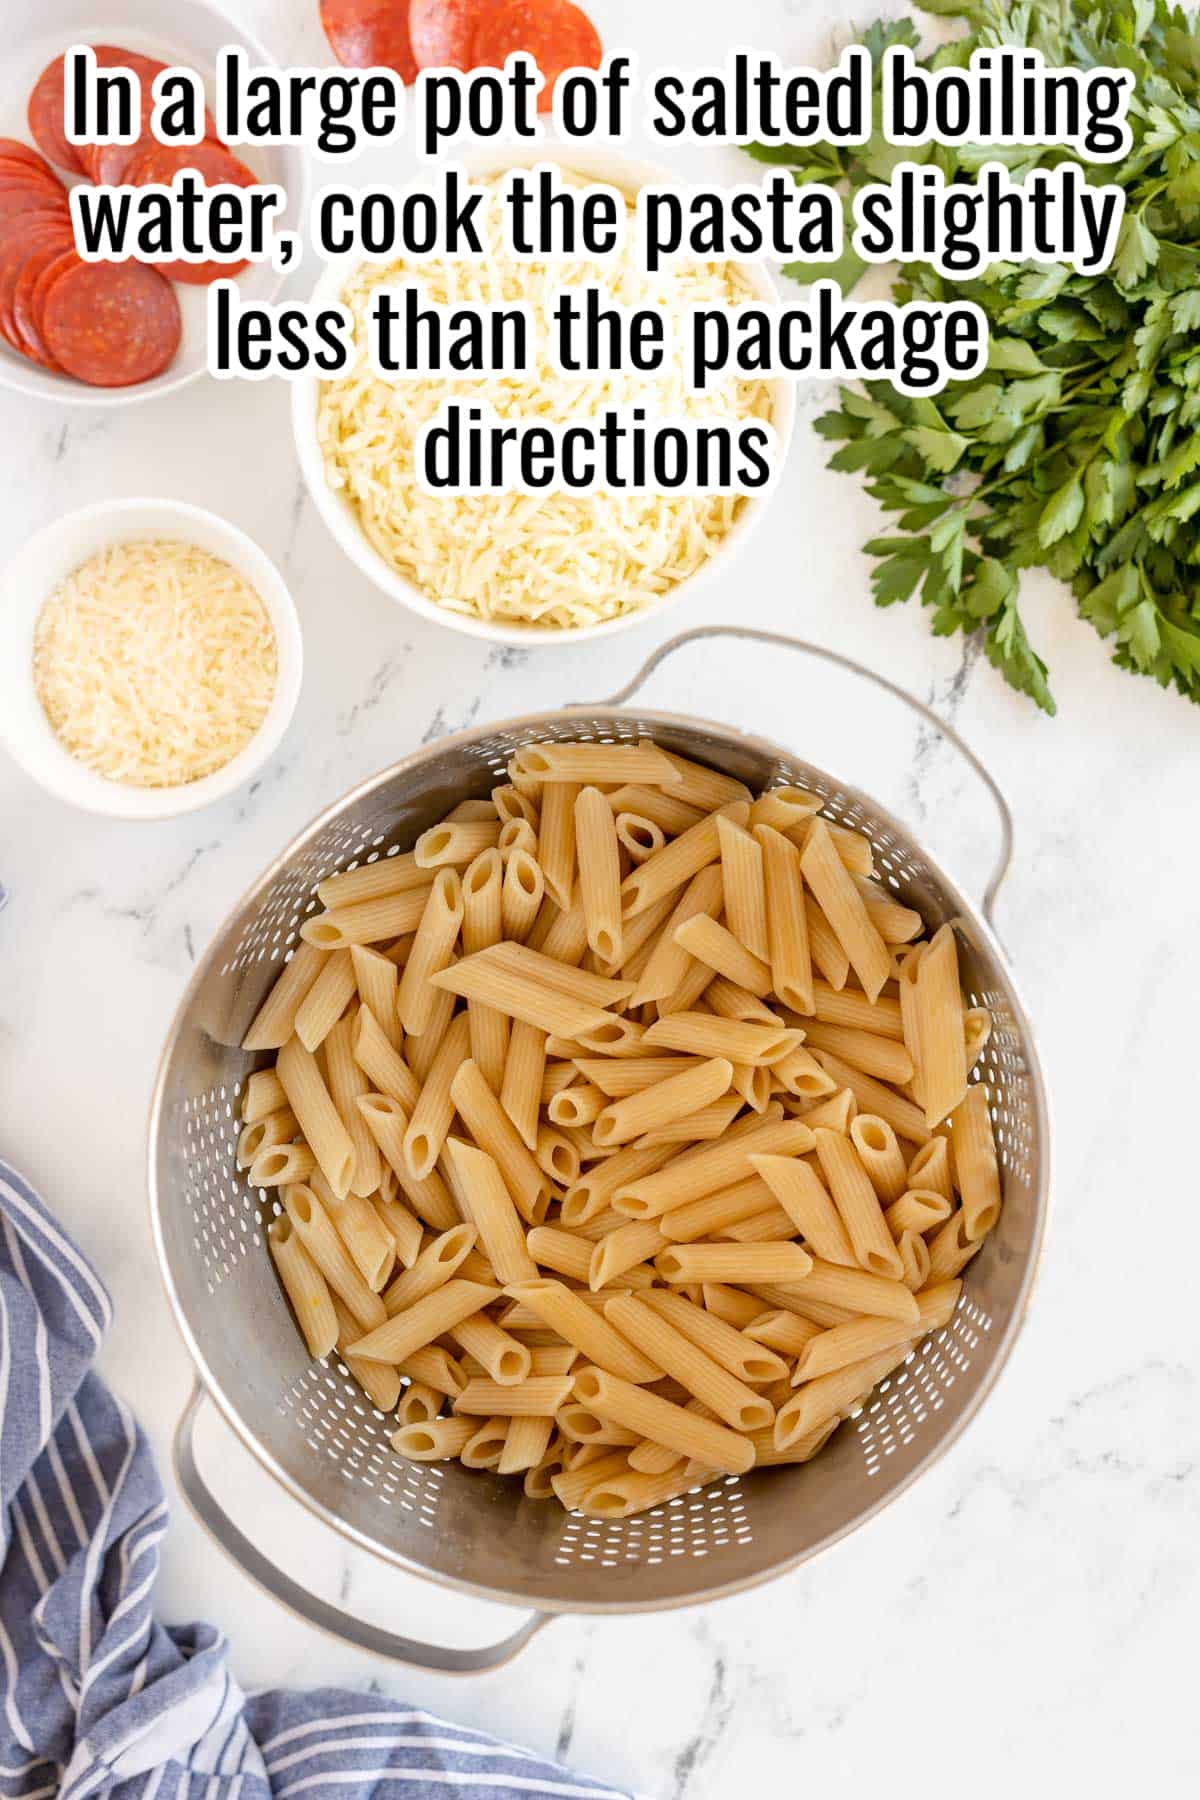 cooked pasta in a large pot with directions overlaid in text.